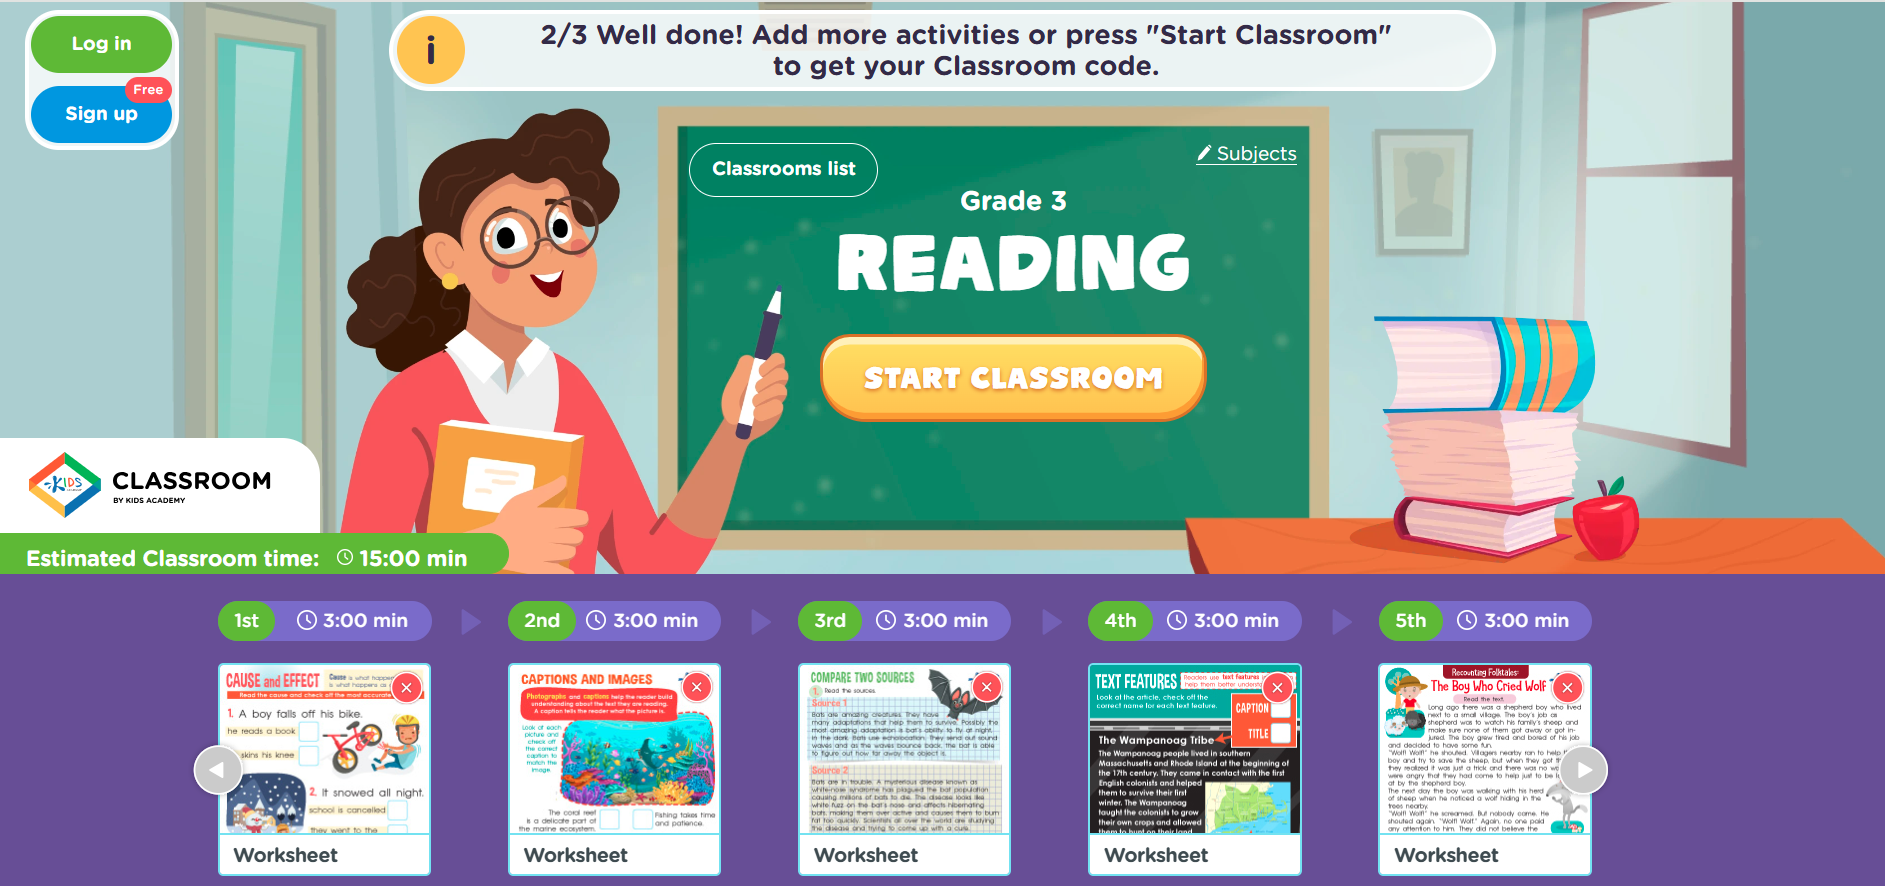 image of Kids Academy Reading Classroom created by the user